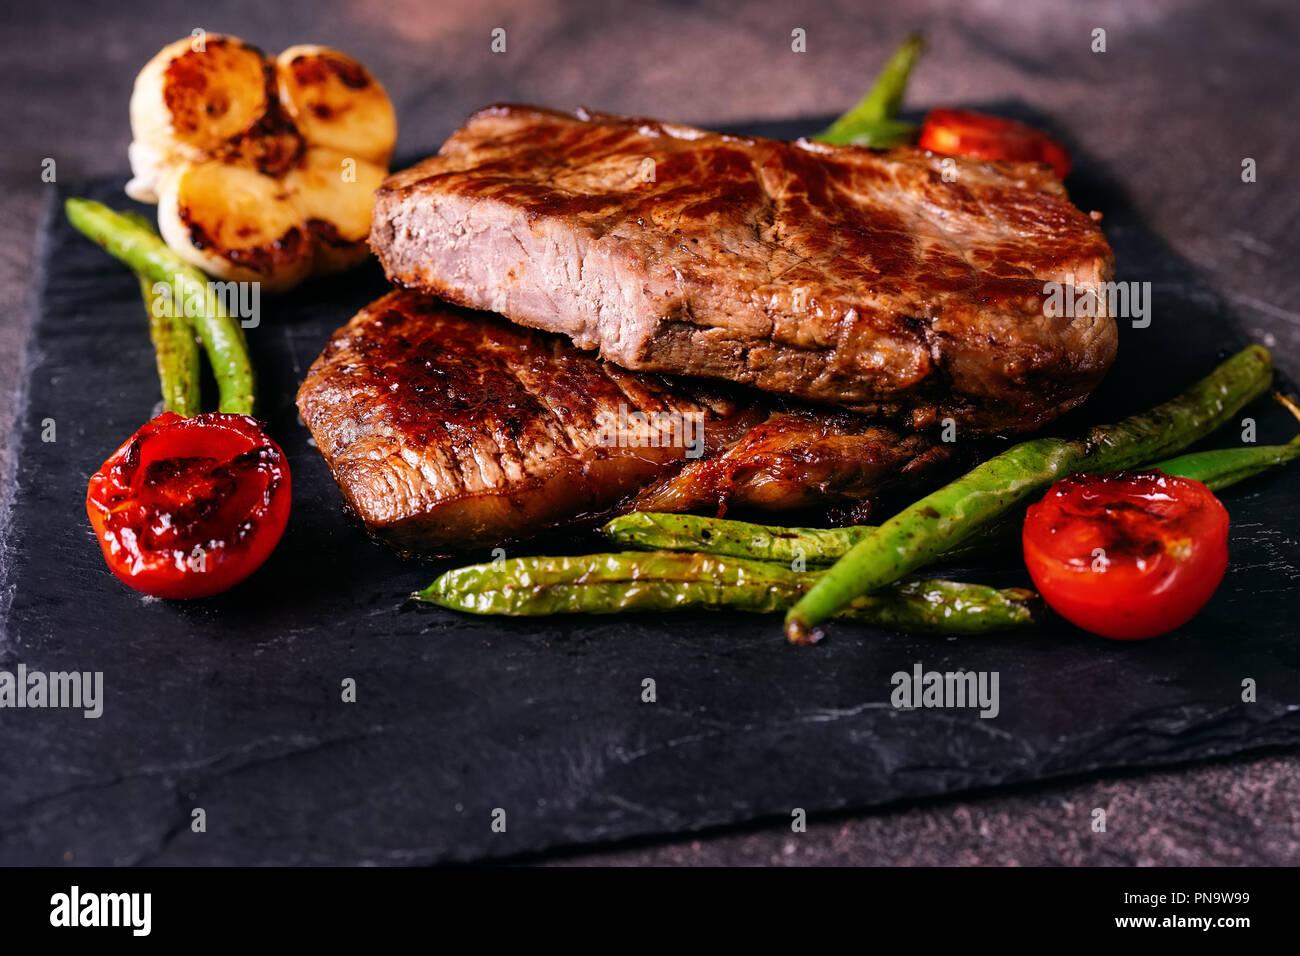 Prepared Delicious Beaf Steaks With Vegetables On Slate Plate Close Up Stock Photo Alamy